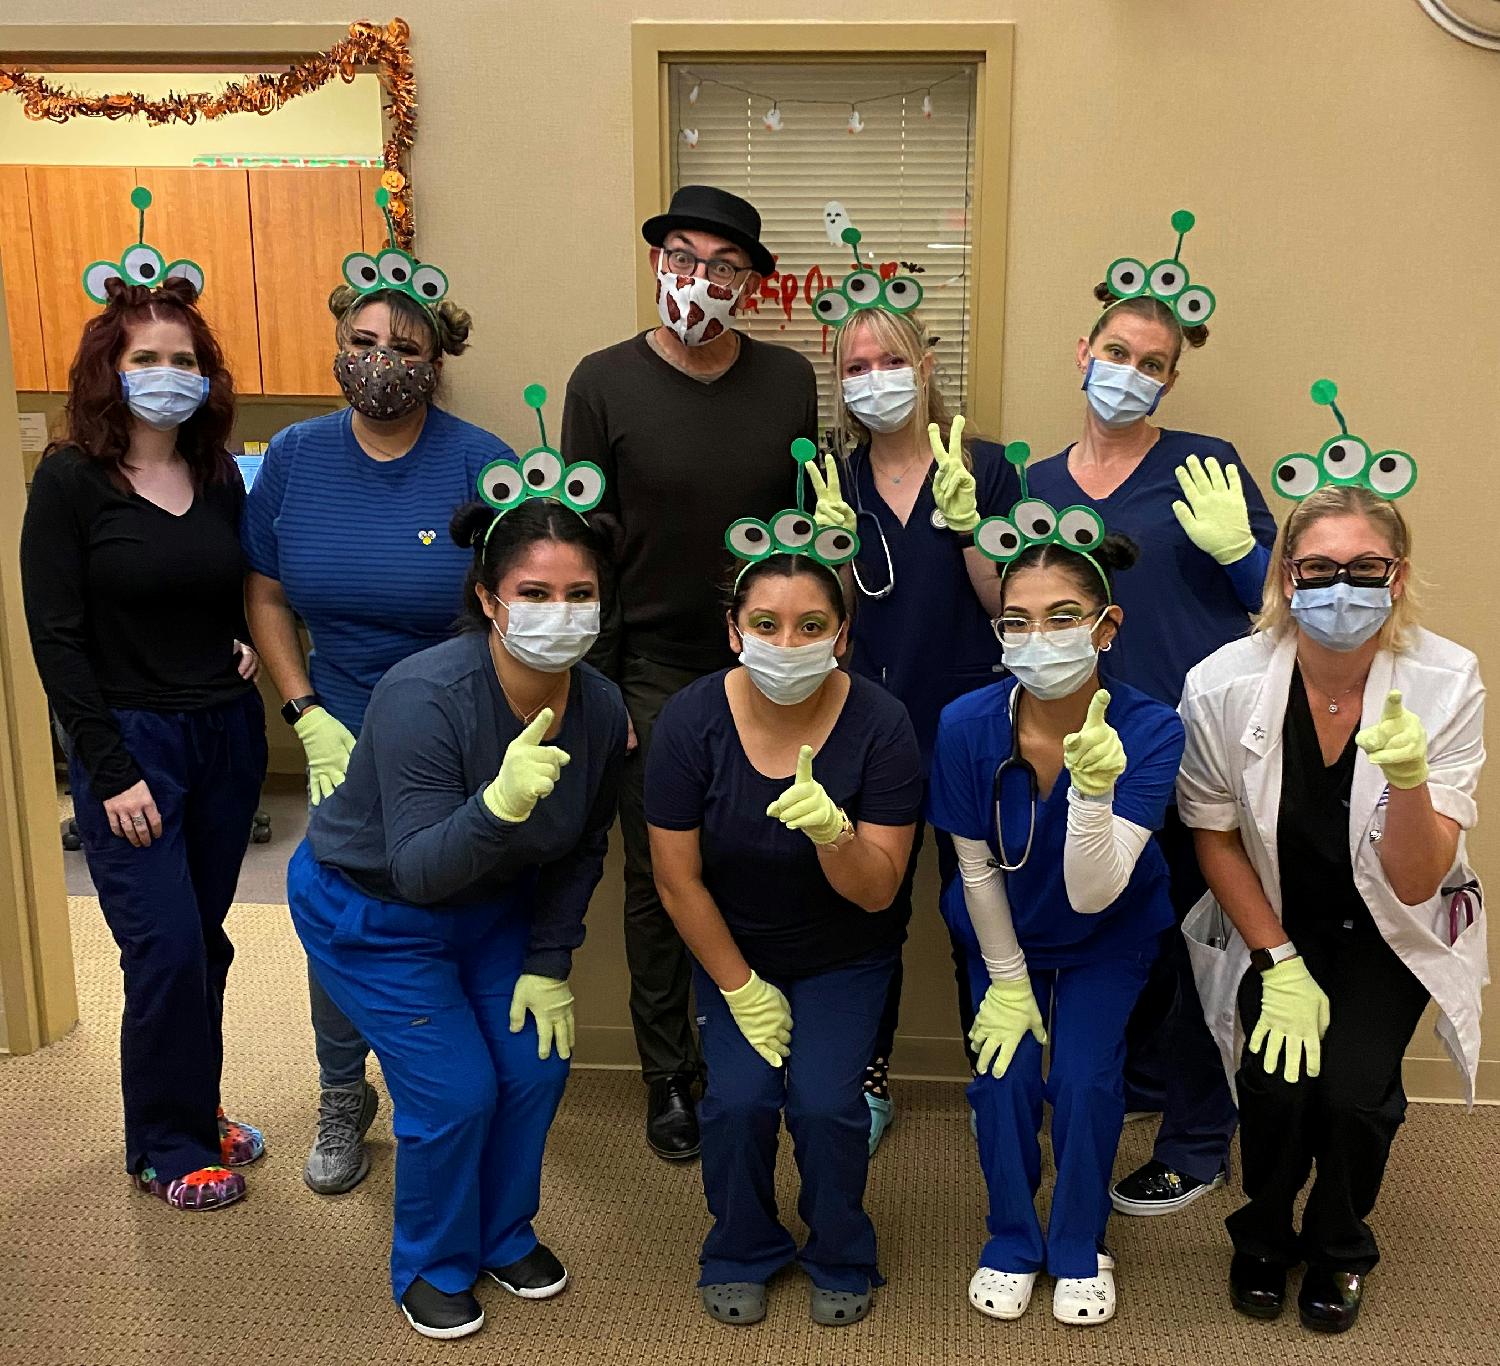  south clinic staff and physicians celebrating Halloween dress up day 